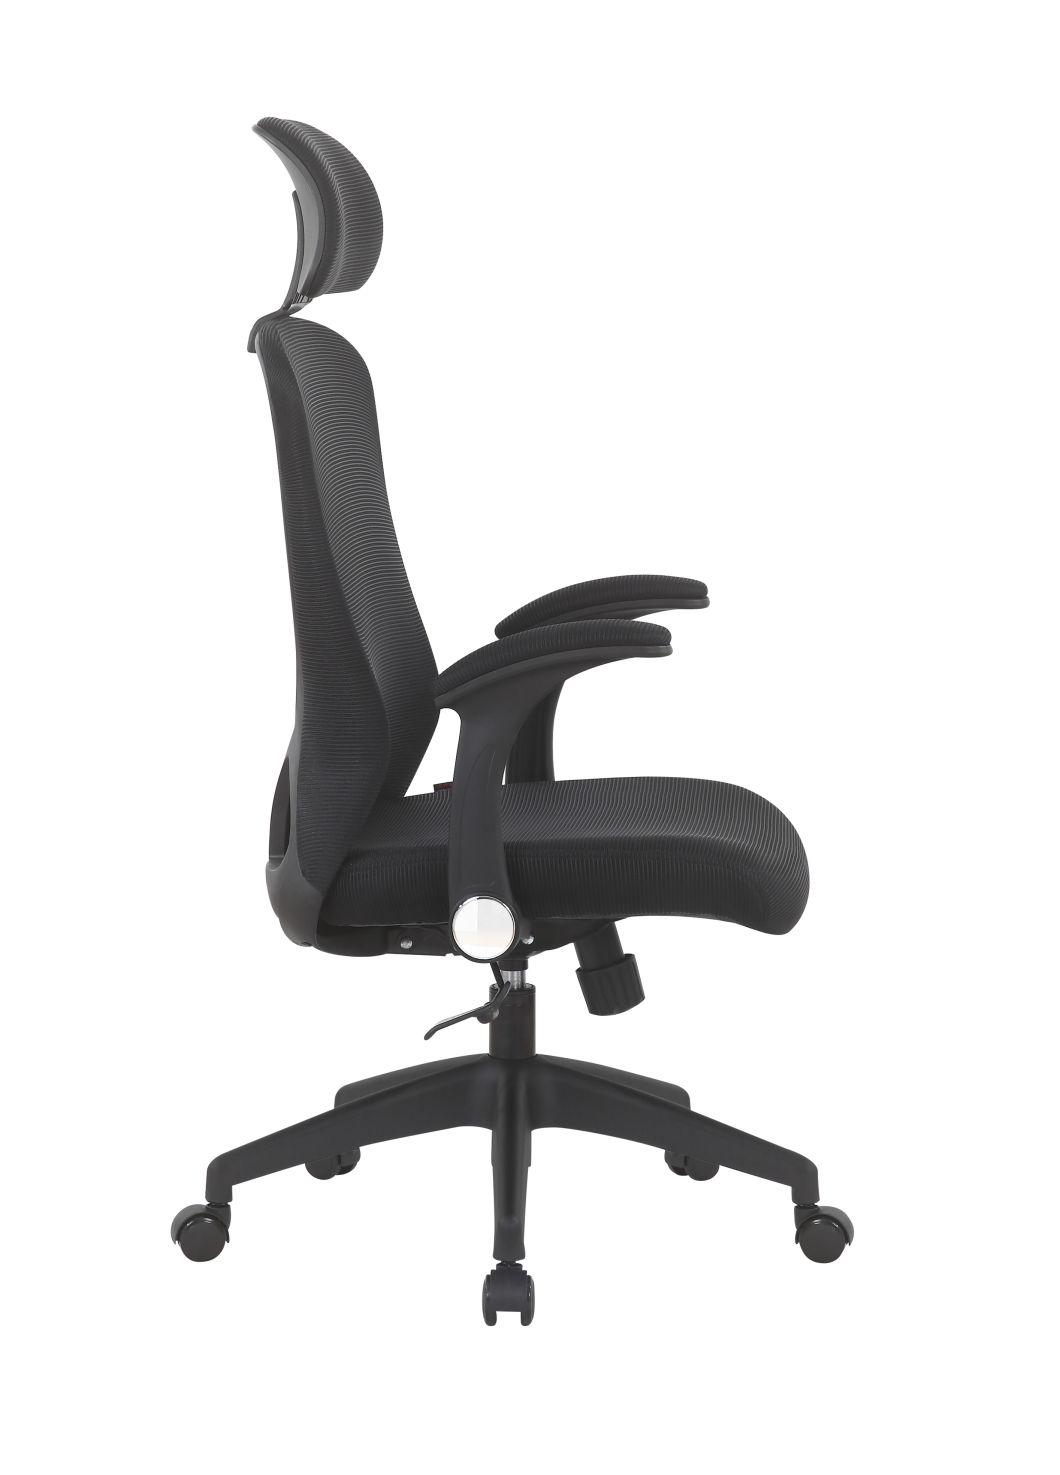 Headrest Adjustable Swivel Staff Executive Computer Ergonomic Office Chair with Flip-up Arms